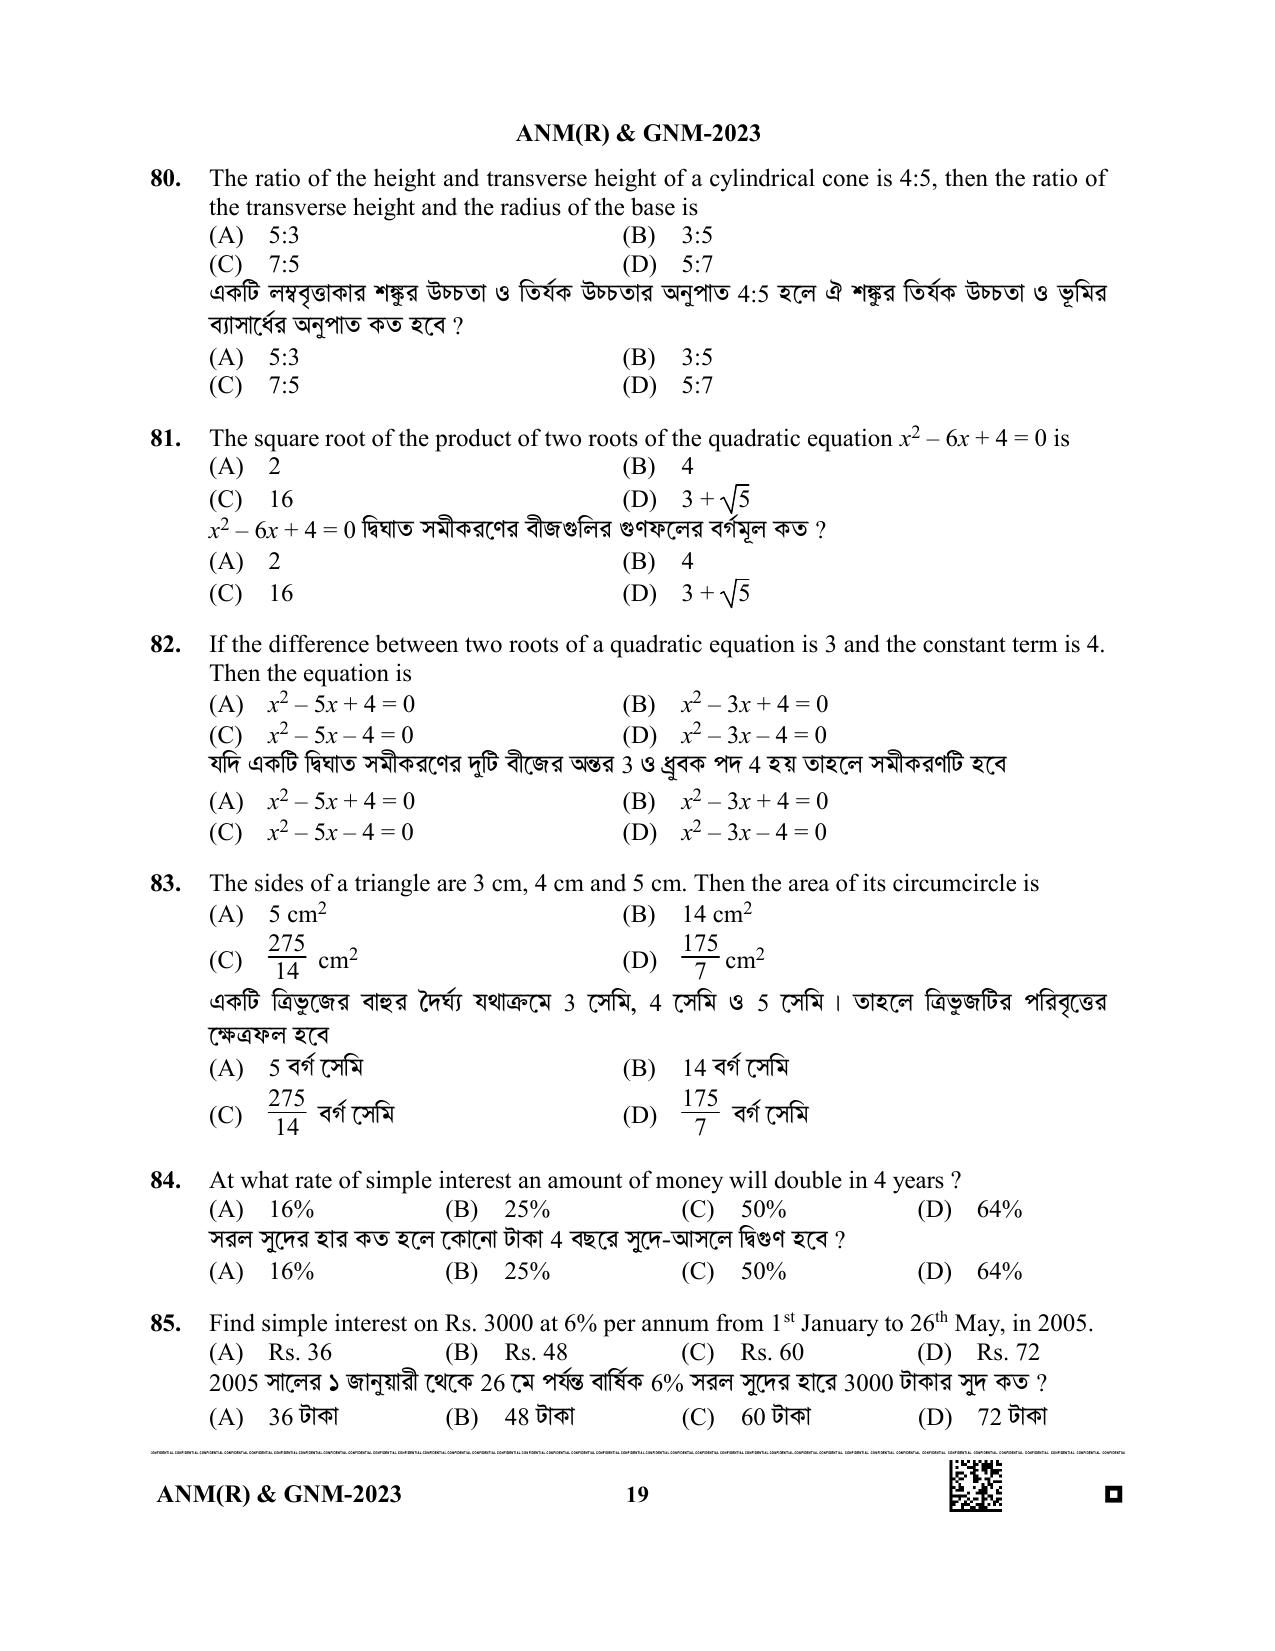 WB ANM GNM 2023 Question Paper - Page 19